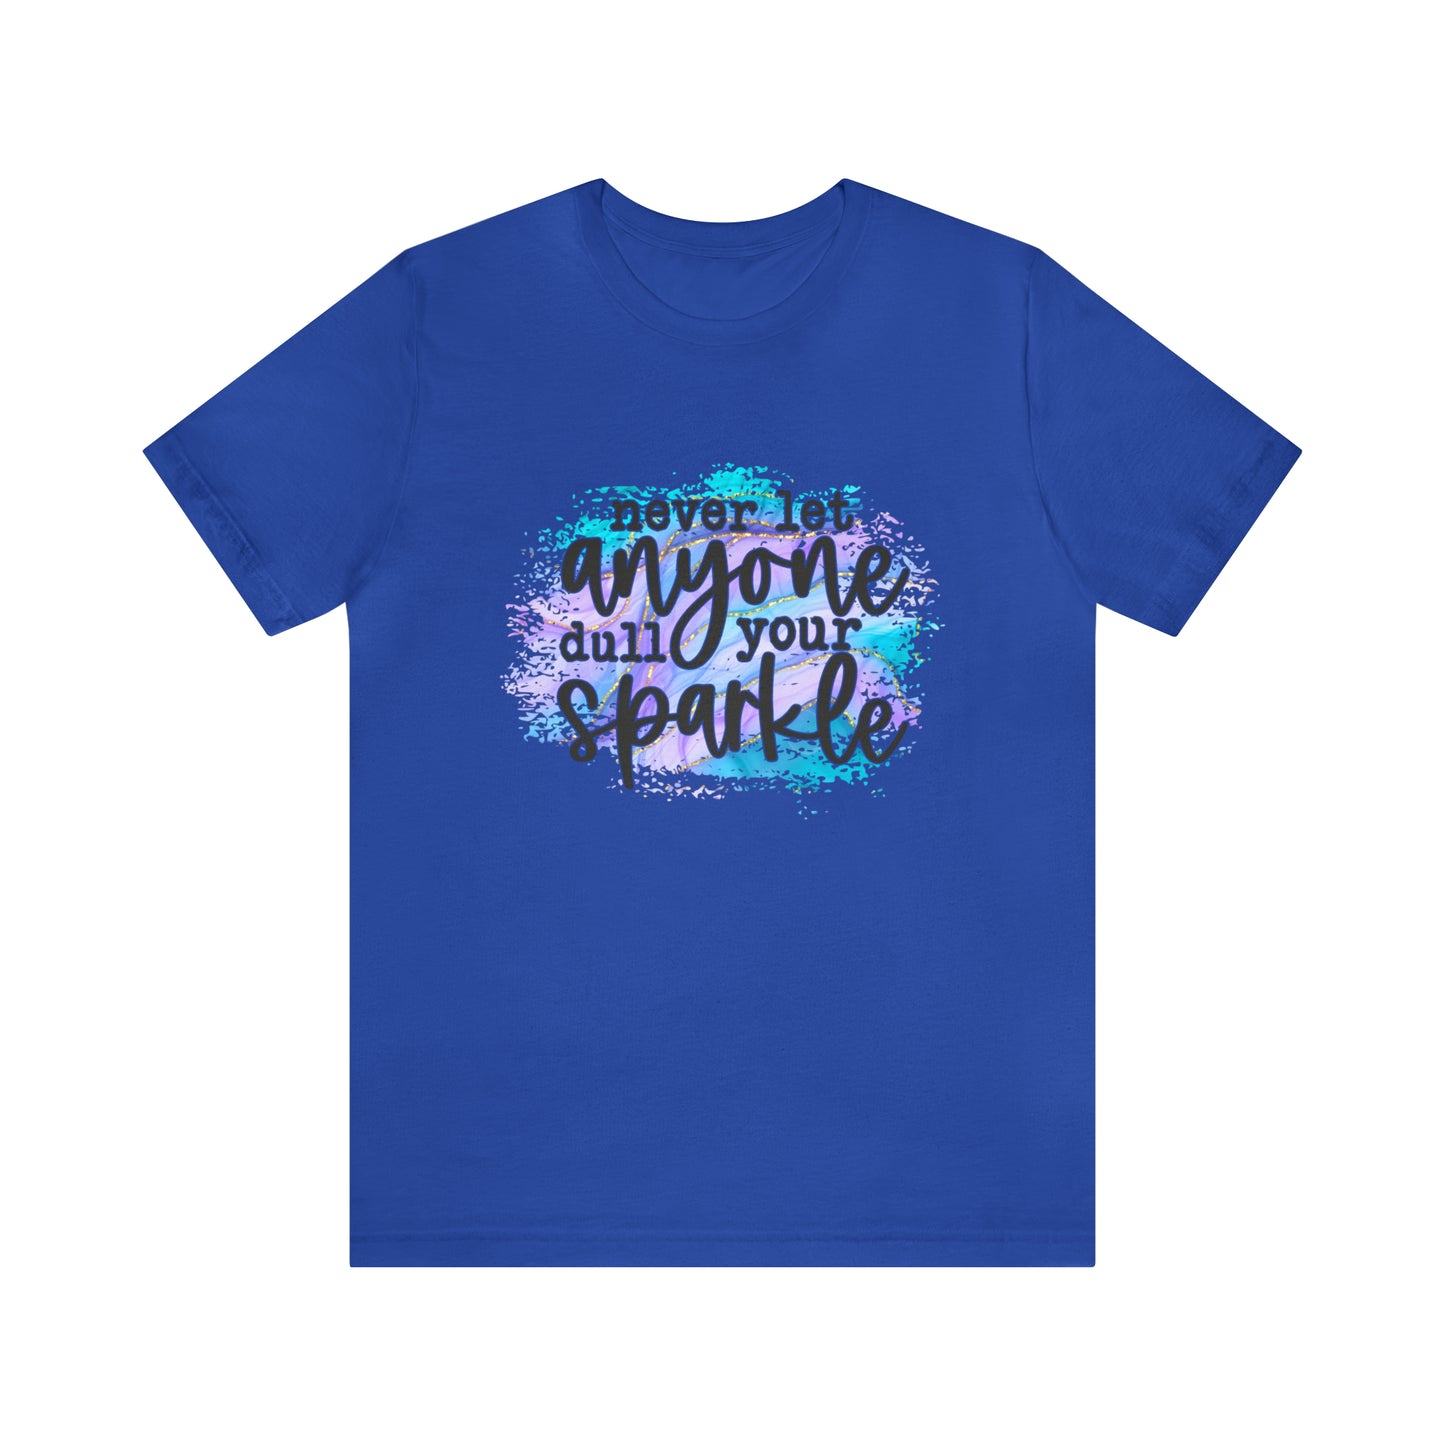 Never let anyone dull your sparkle Short Sleeve Women's Tee